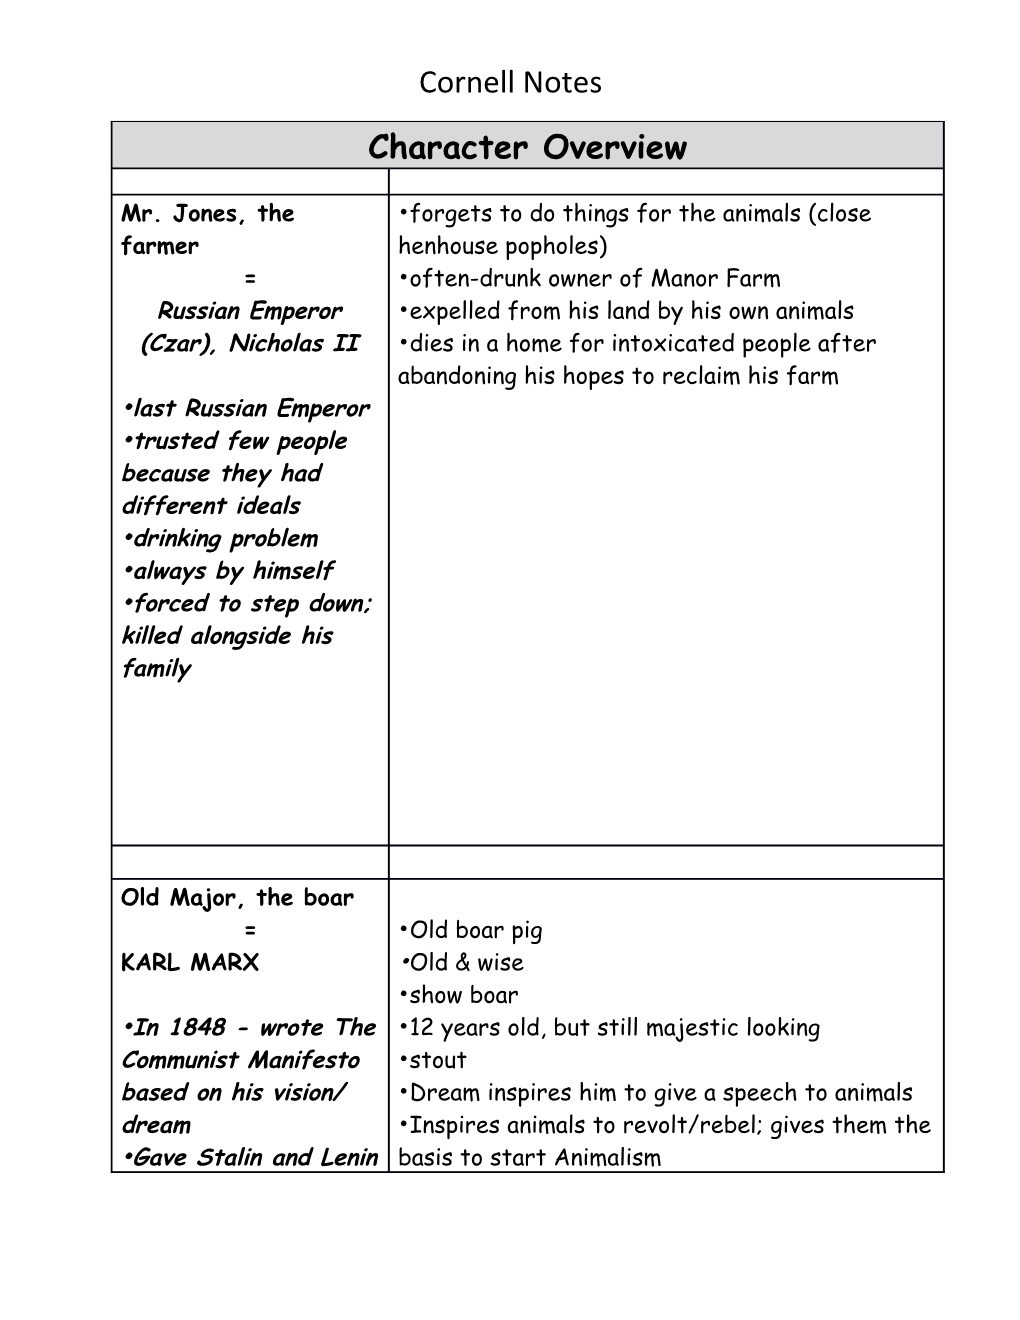 Cornell Notes s1